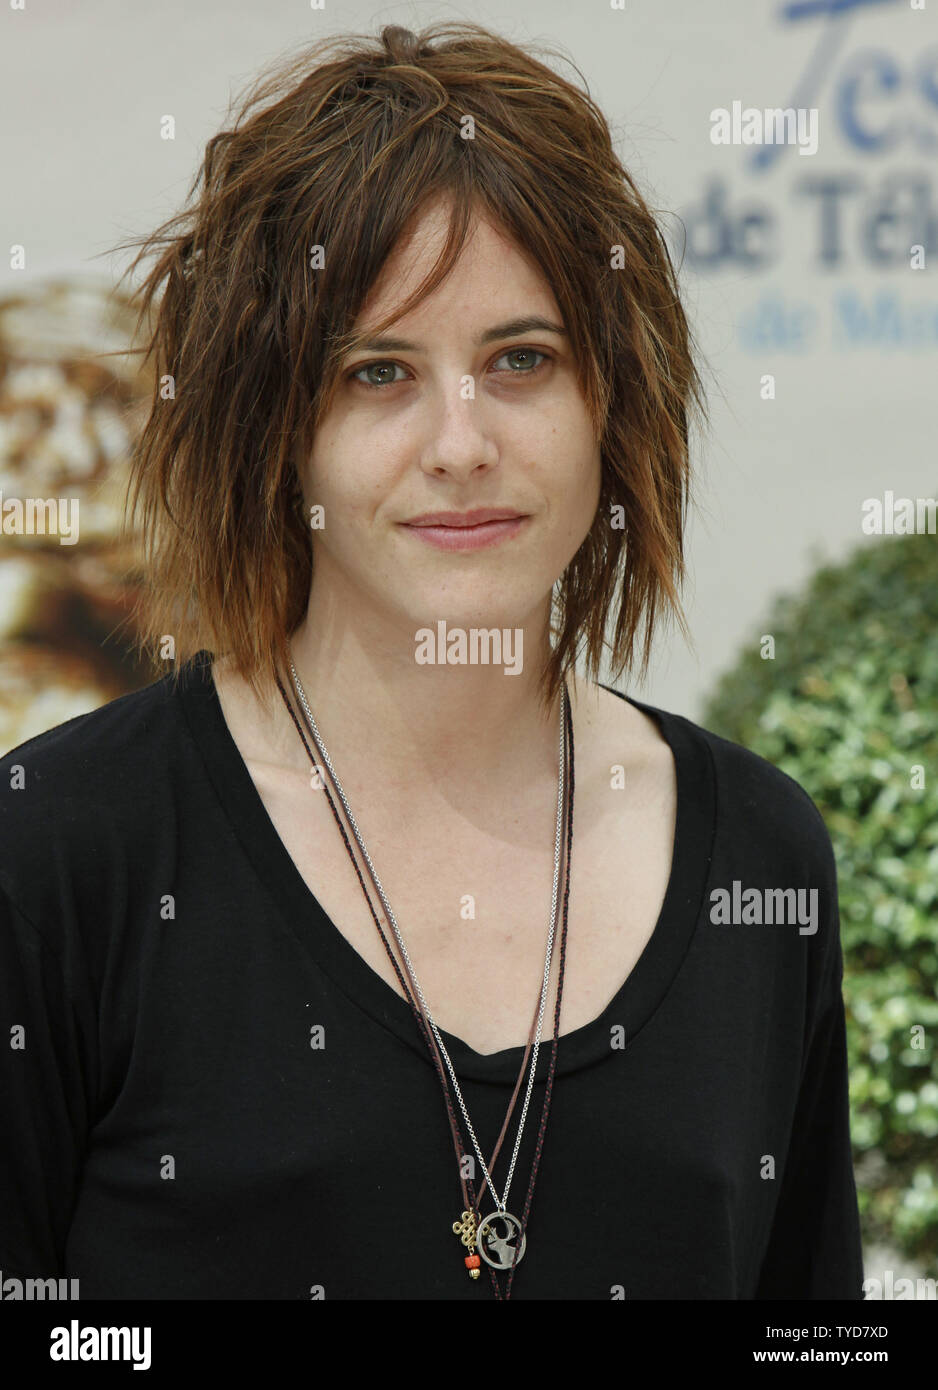 Actress Kate Moennig arrives at a photocall for the television show "The L during 49th Monte Carlo Television Festival in Monte Carlo, on June 11, 2009. (UPI Photo/David Silpa